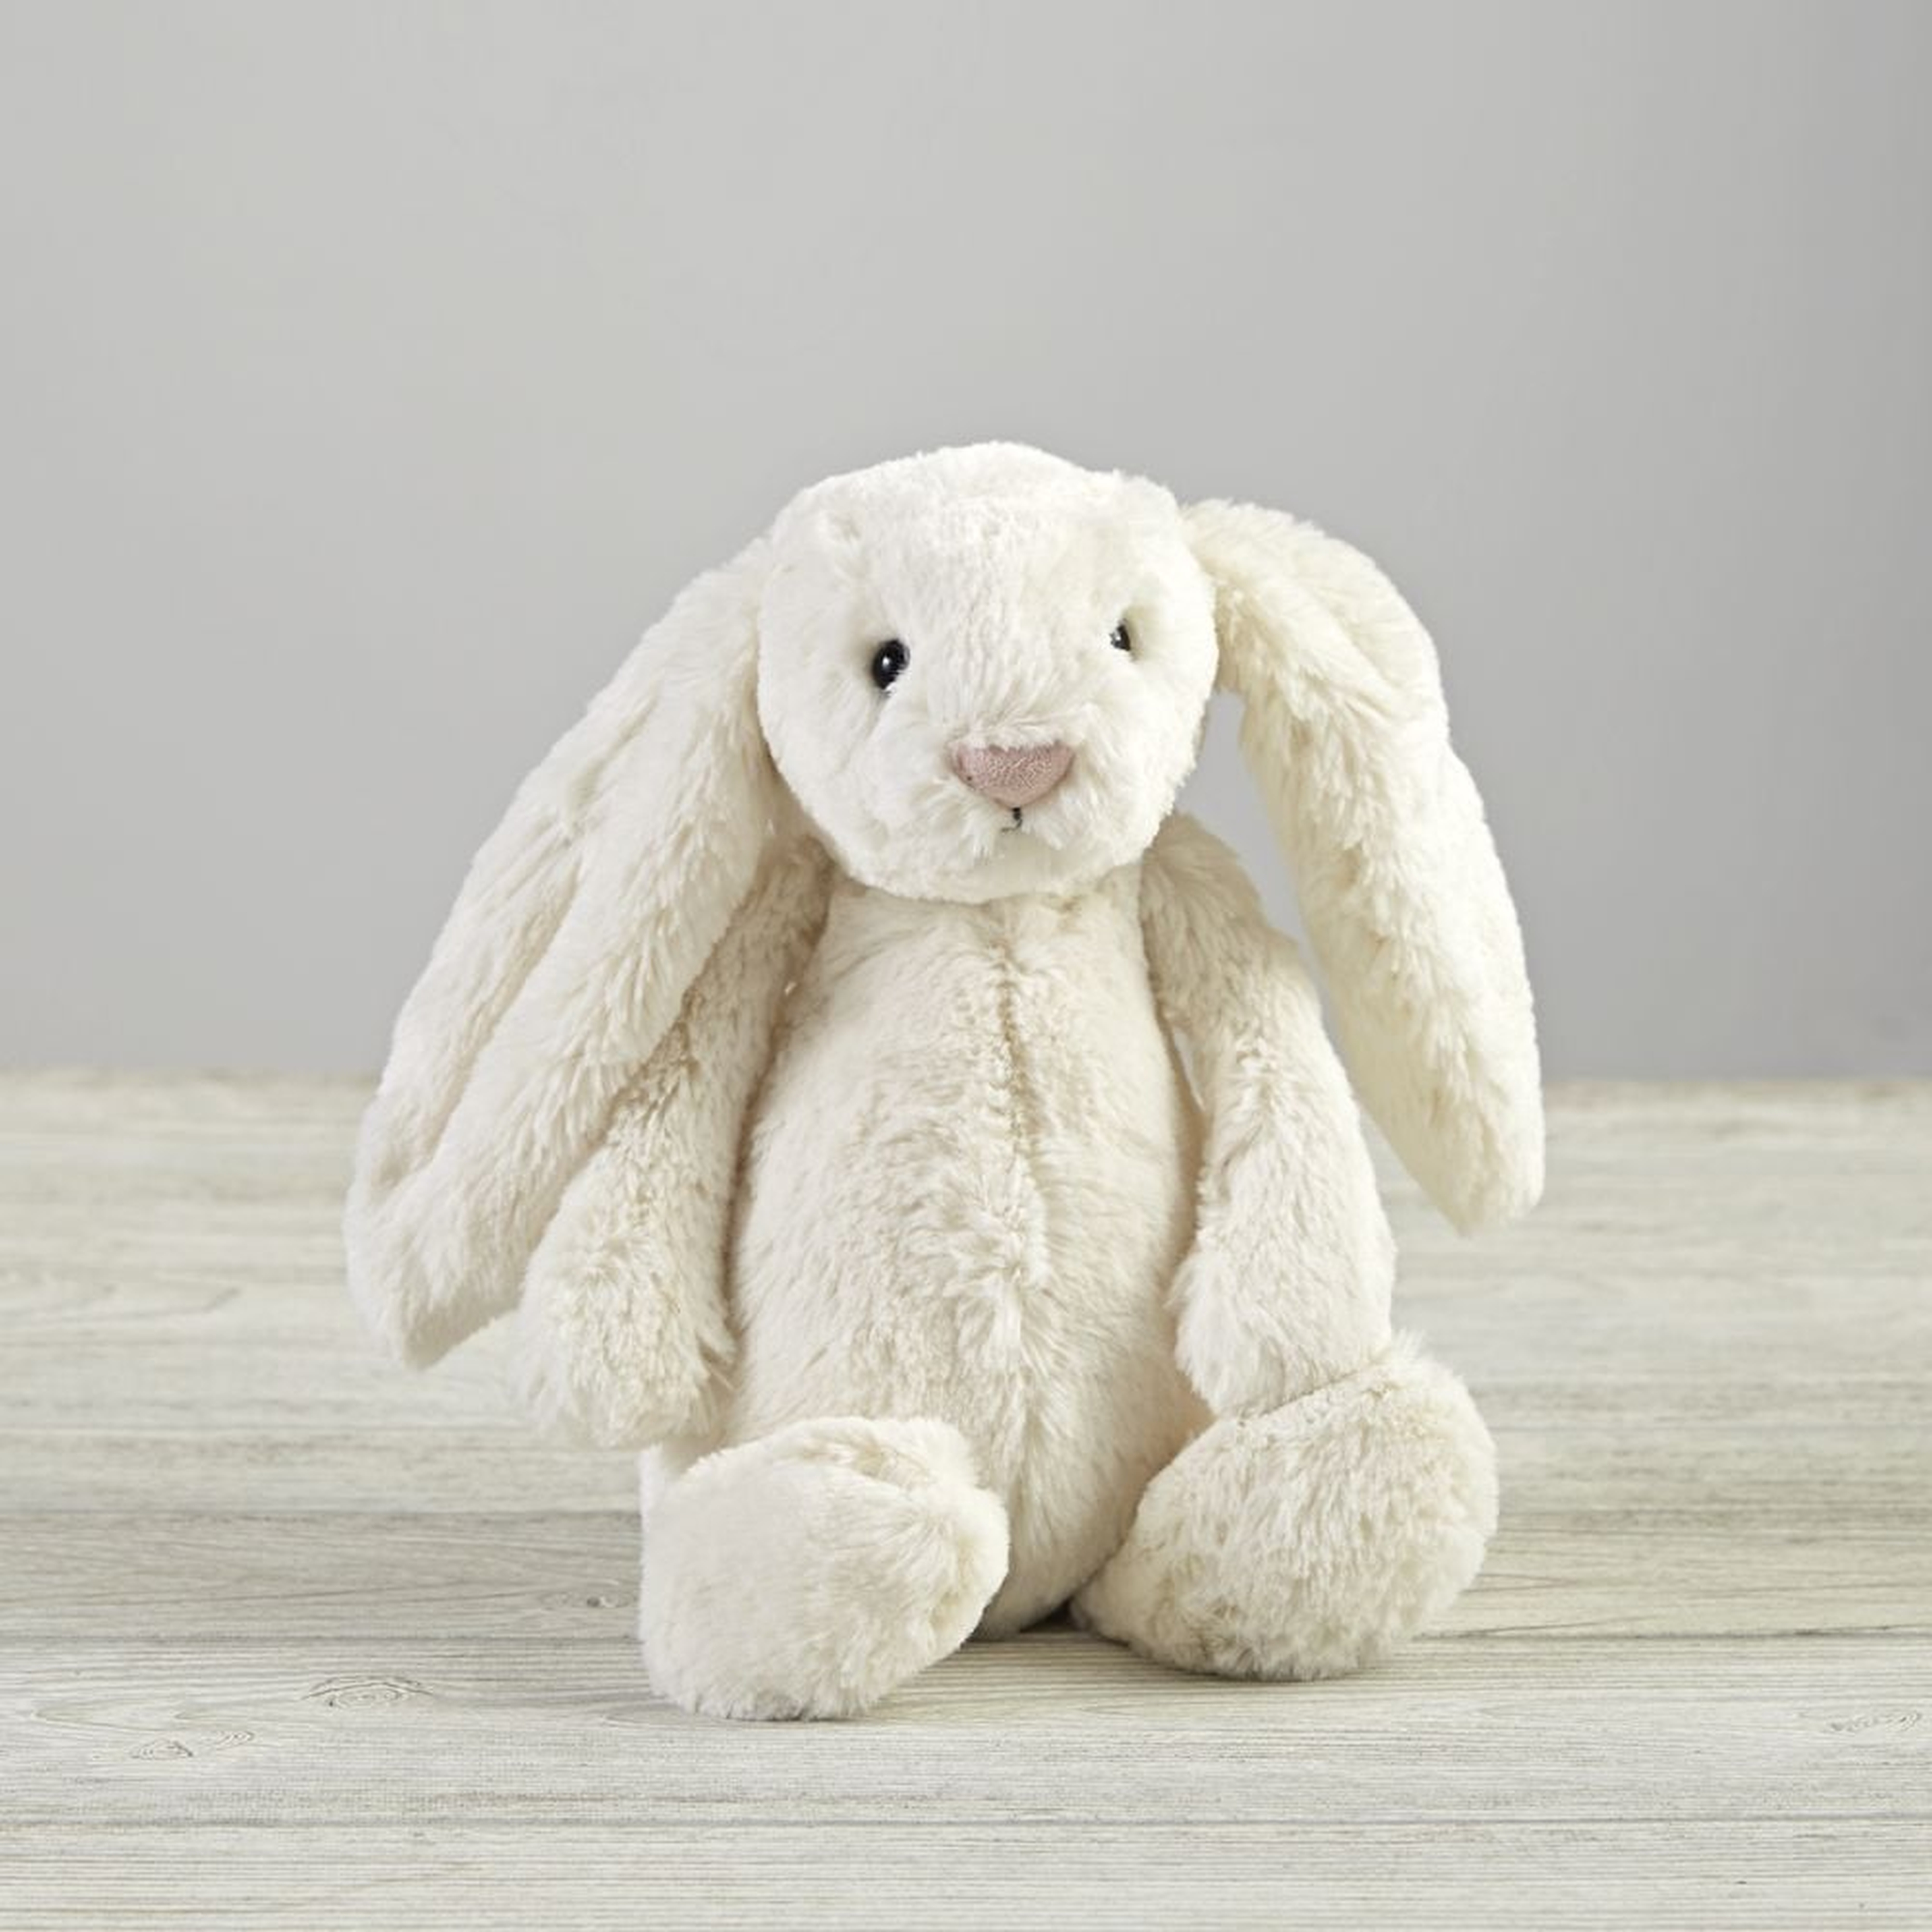 Jellycat ® Bunny Stuffed Animal, White - Crate and Barrel